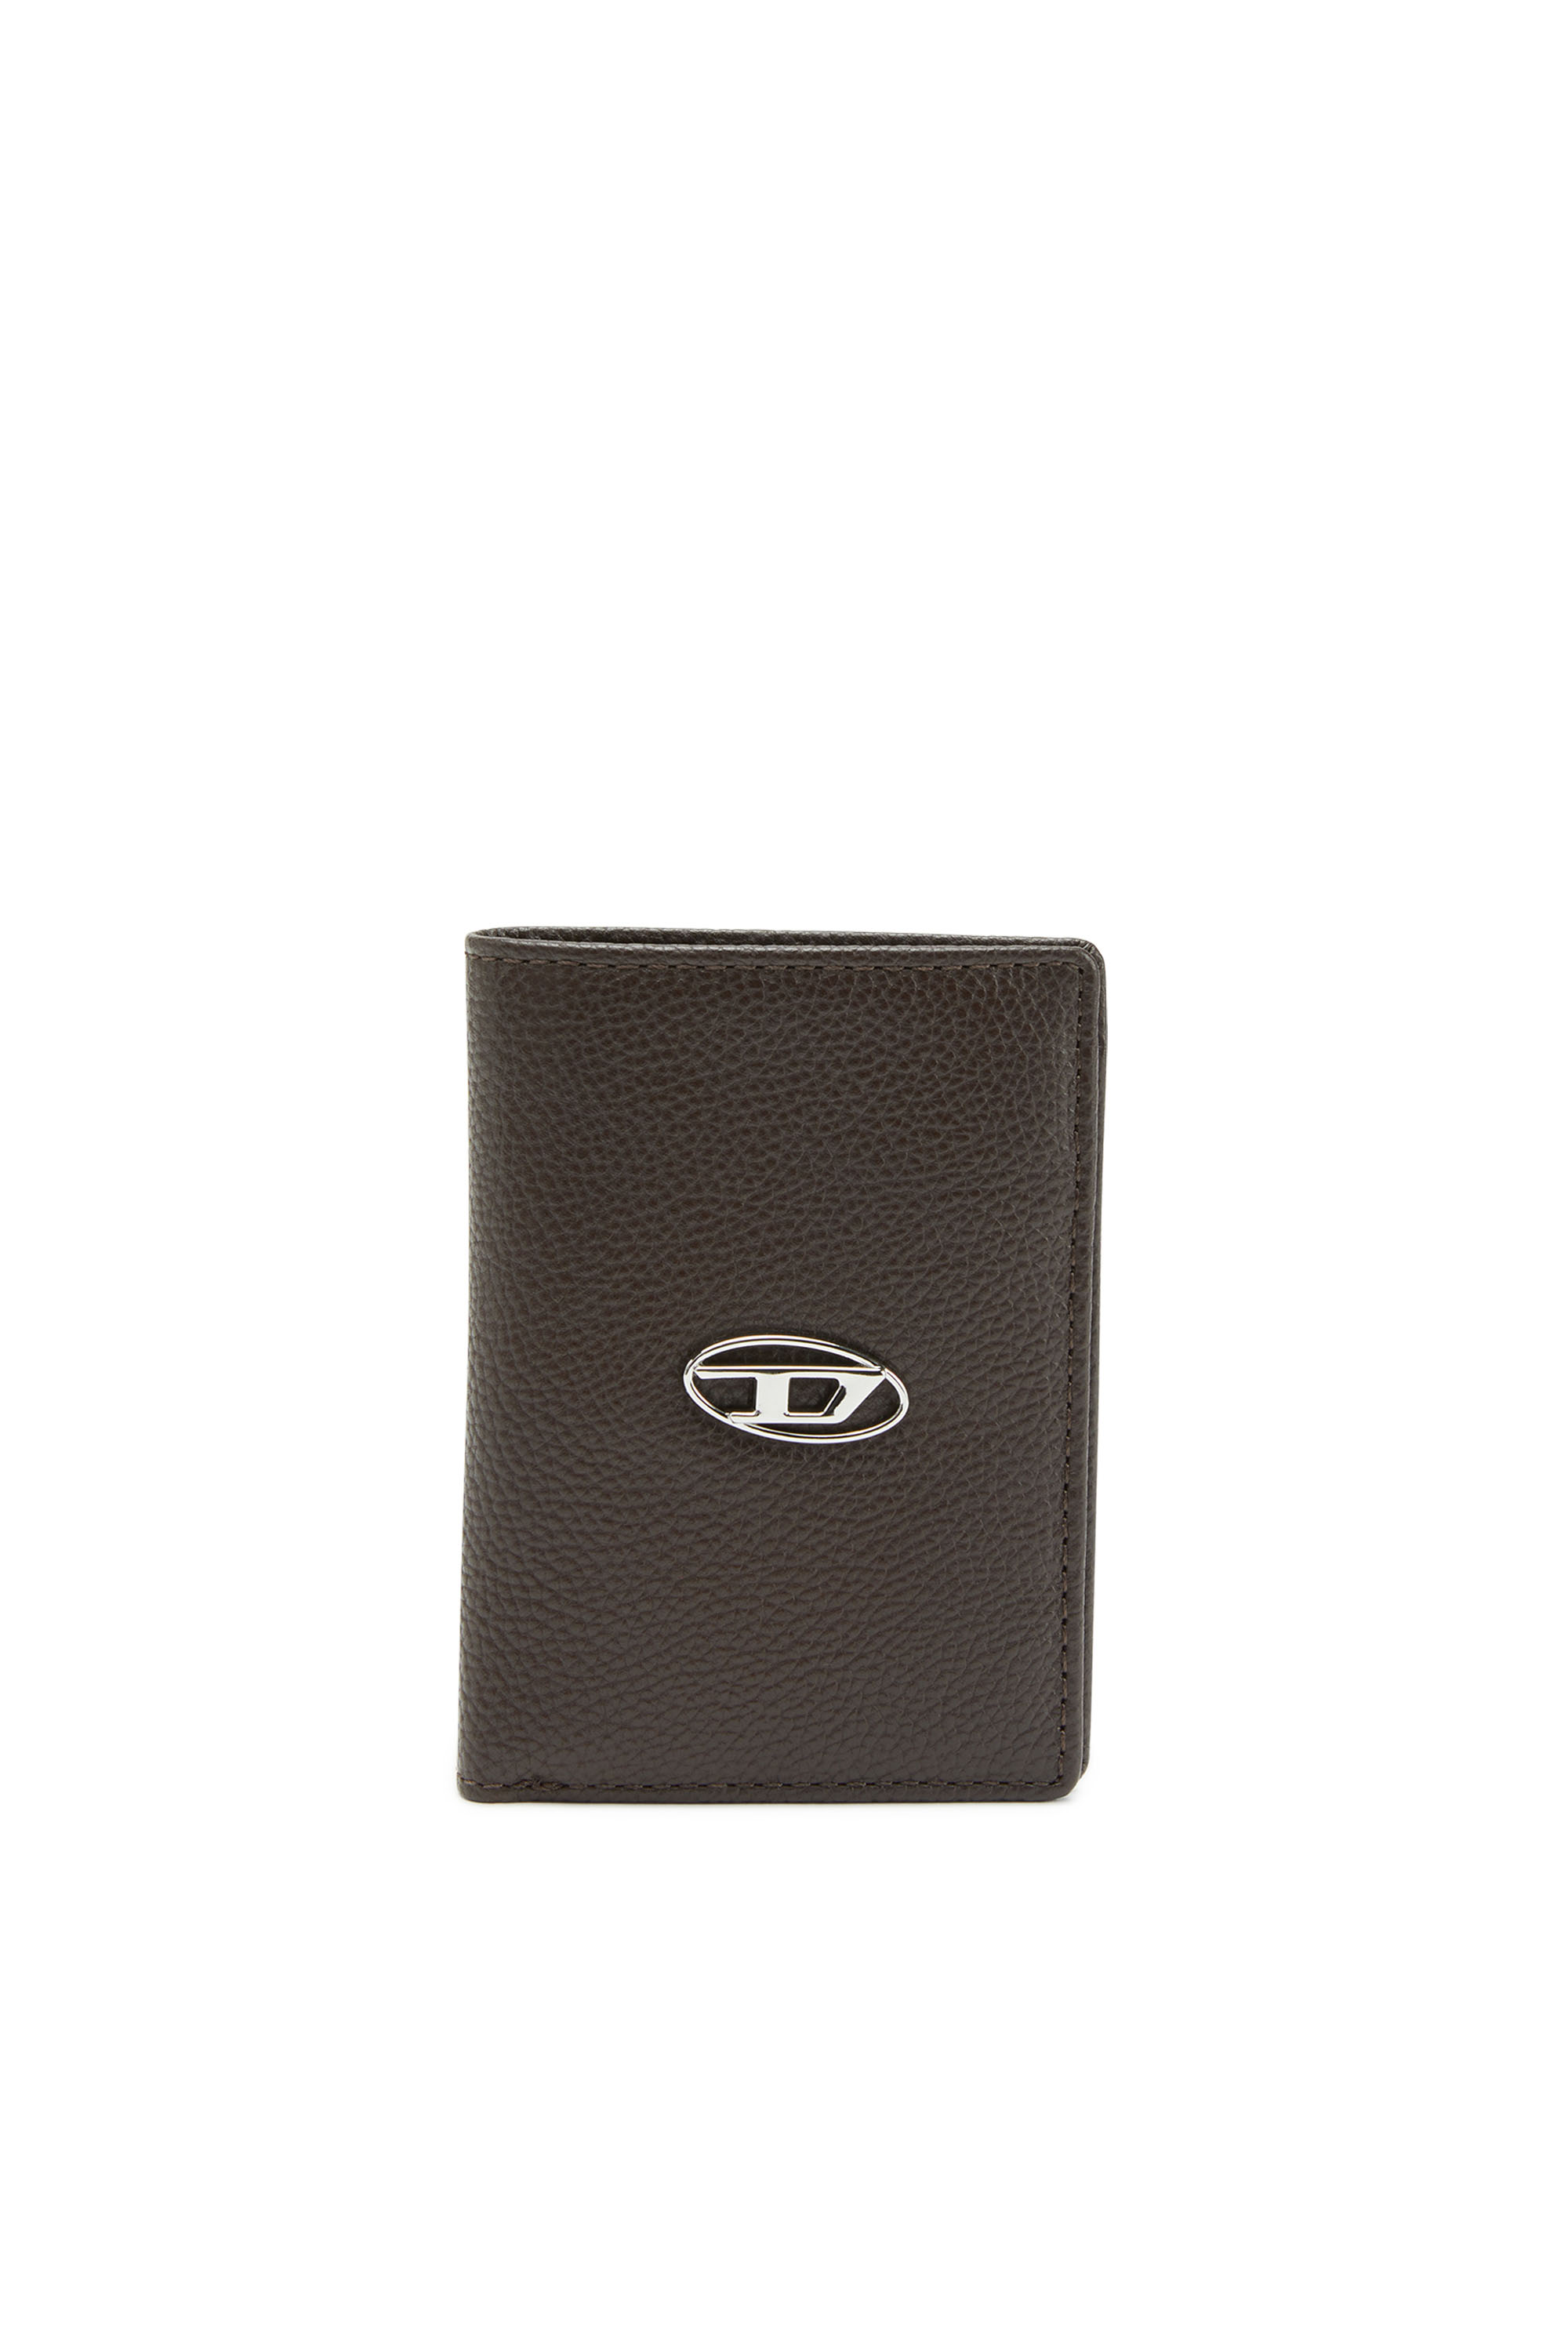 Diesel Leather Bi-fold Wallet With Logo Plaque In Brown